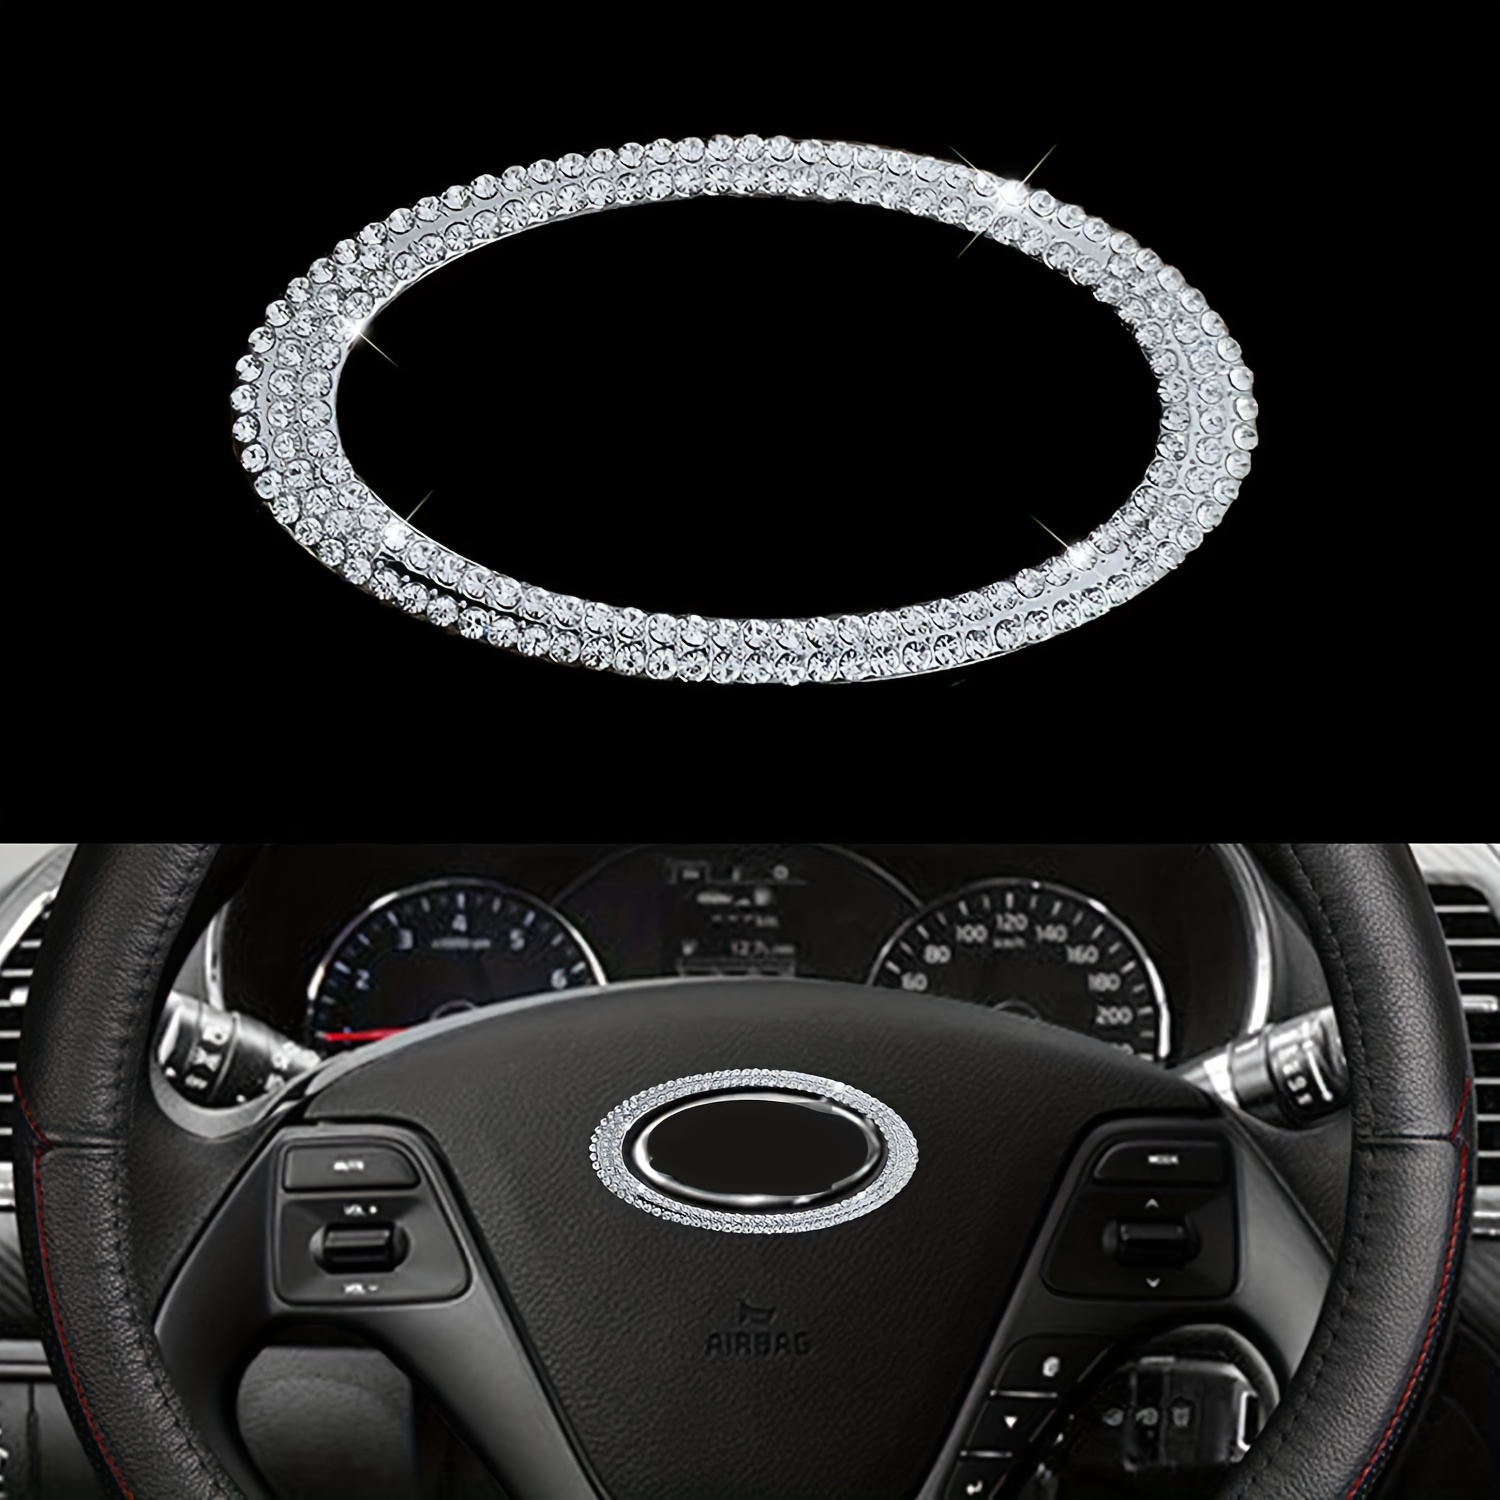  Bling Car Trim Self Adhesive Bling Car Interior Exterior  Accessories Car Accessories for Women Car Dashboard Decorations Rhinestone  Car Accessories Bling Stickers for Car Ornaments (16.4 ft, AB Color) :  Automotive